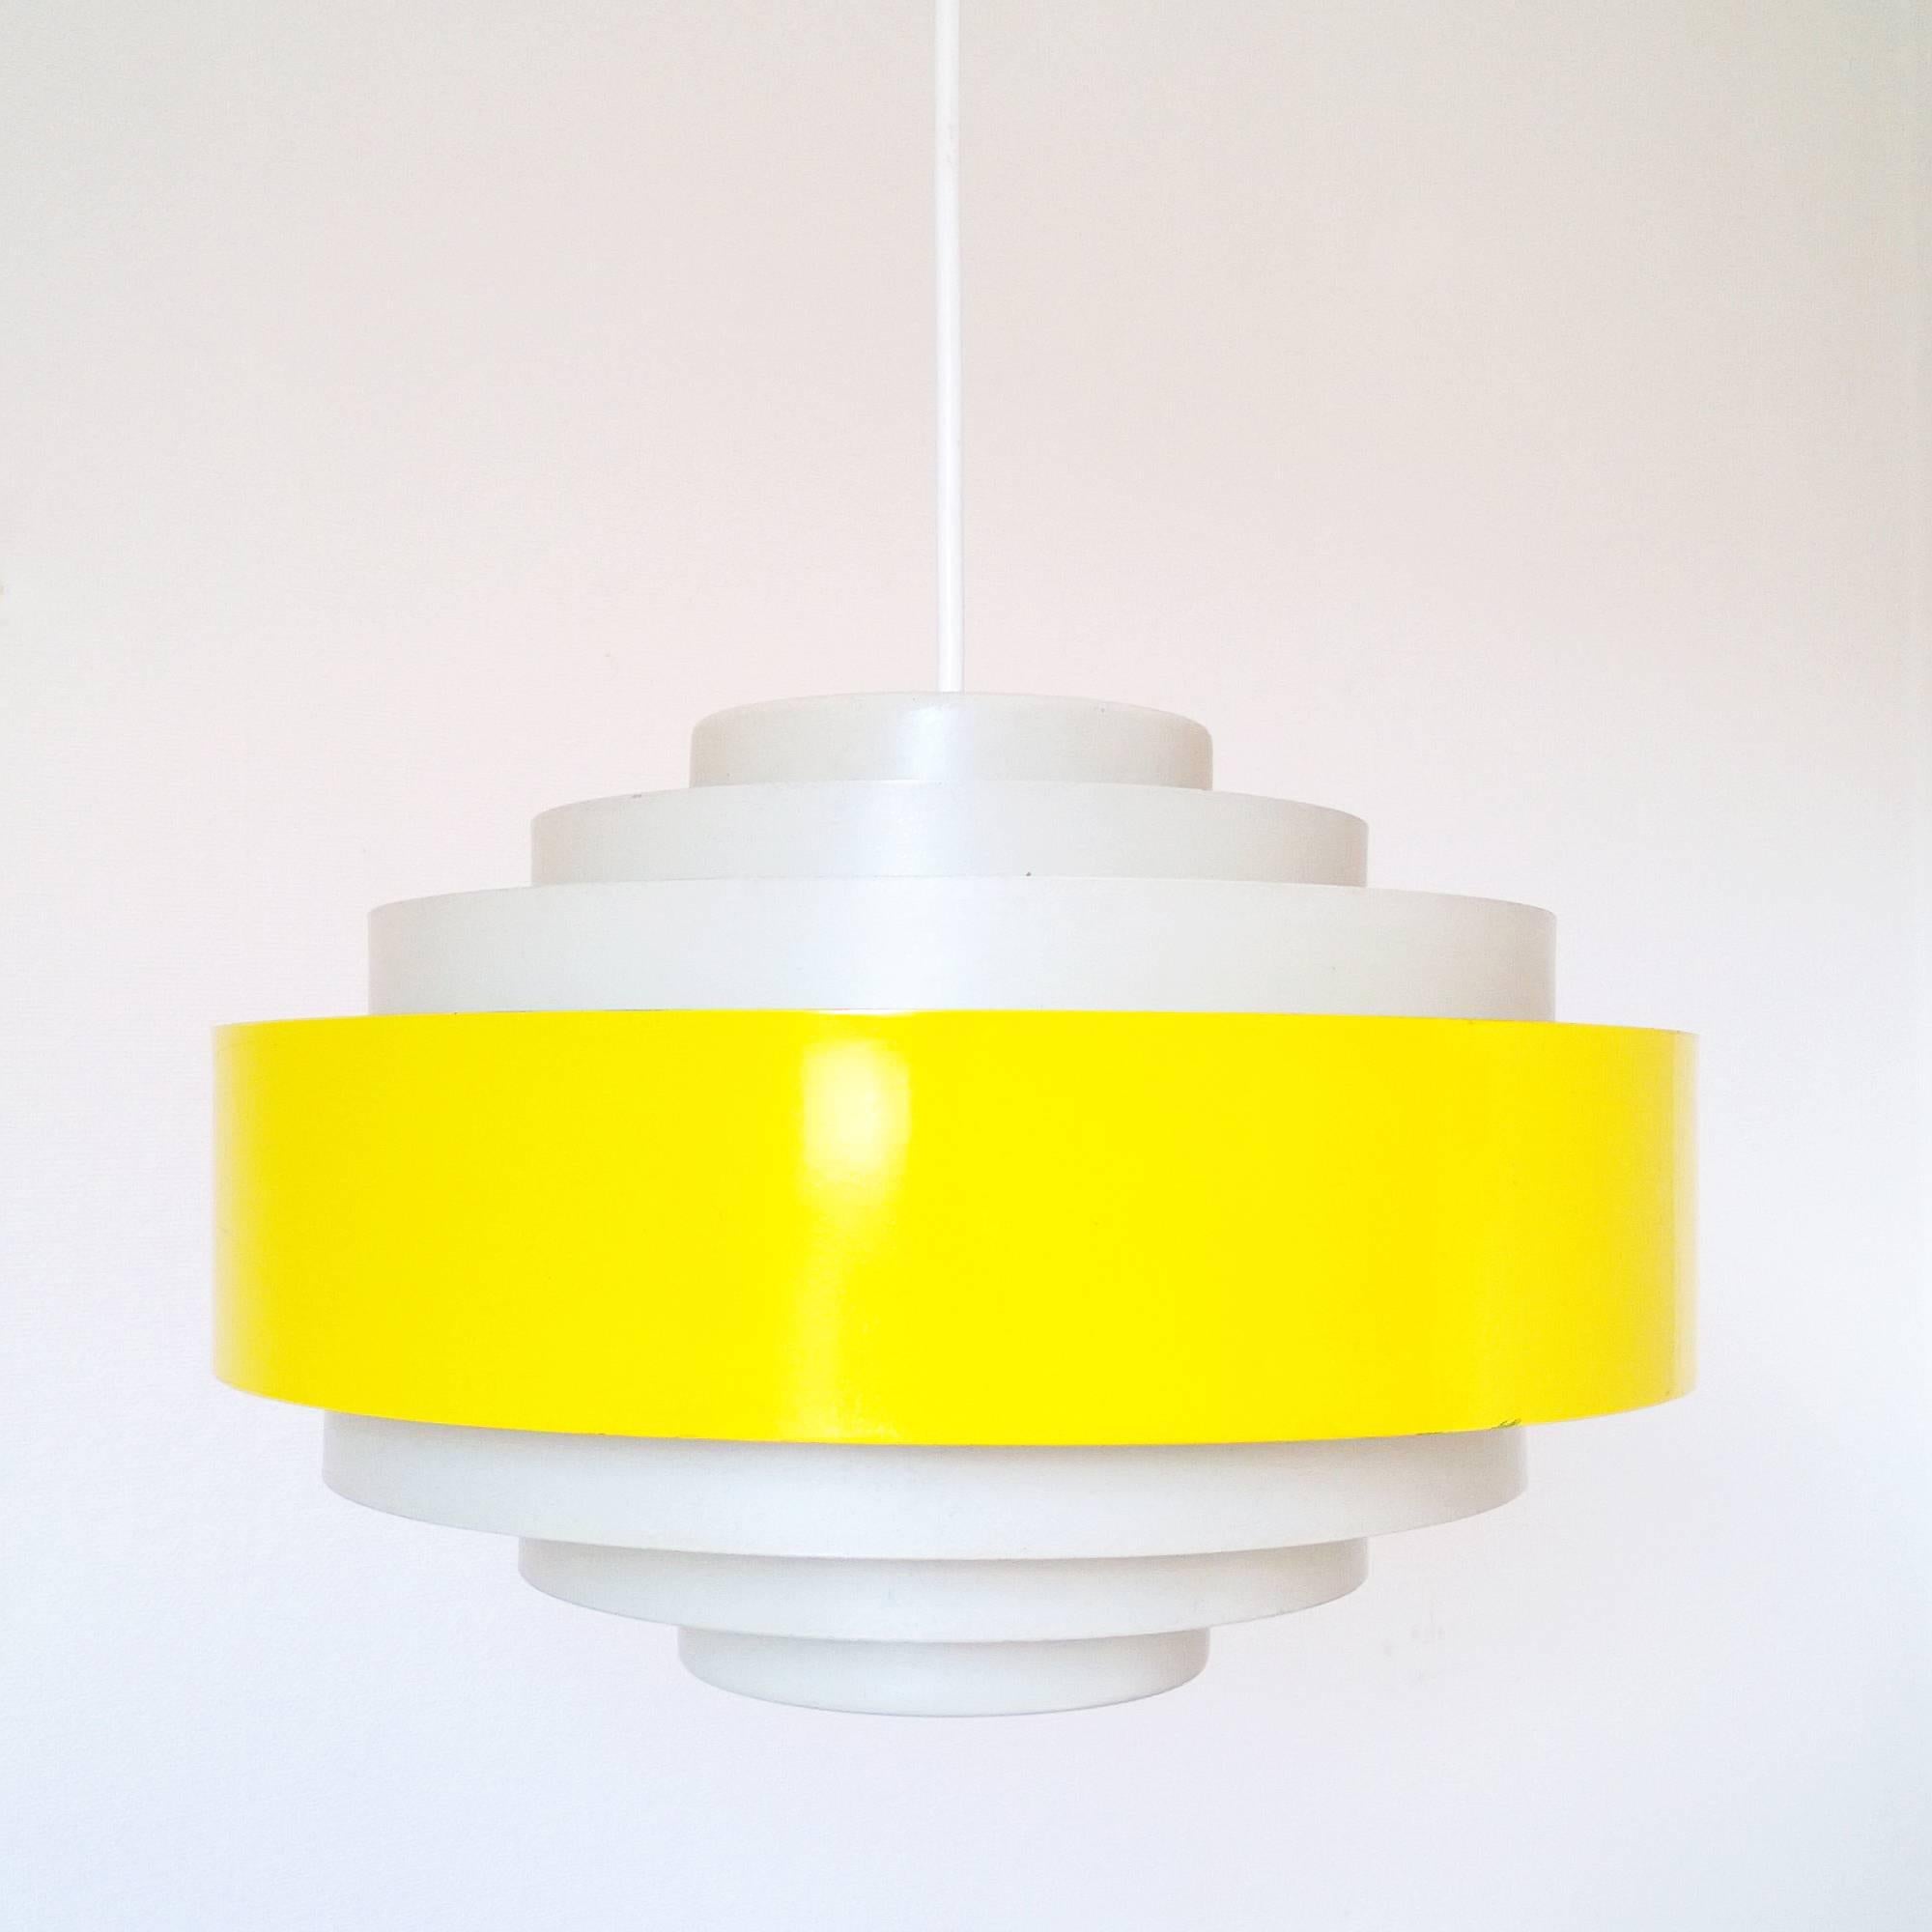 Ultra pendant

Made in Denmark

Producer: Fog and Mørup, Denmark

Design: Jo Hammerborg, 1963

Decade: 1960s.

Rare 1960s Jo Hammerborg ultra pendel, in white-beige and yellow. All original very good vintage condition with original Fog and